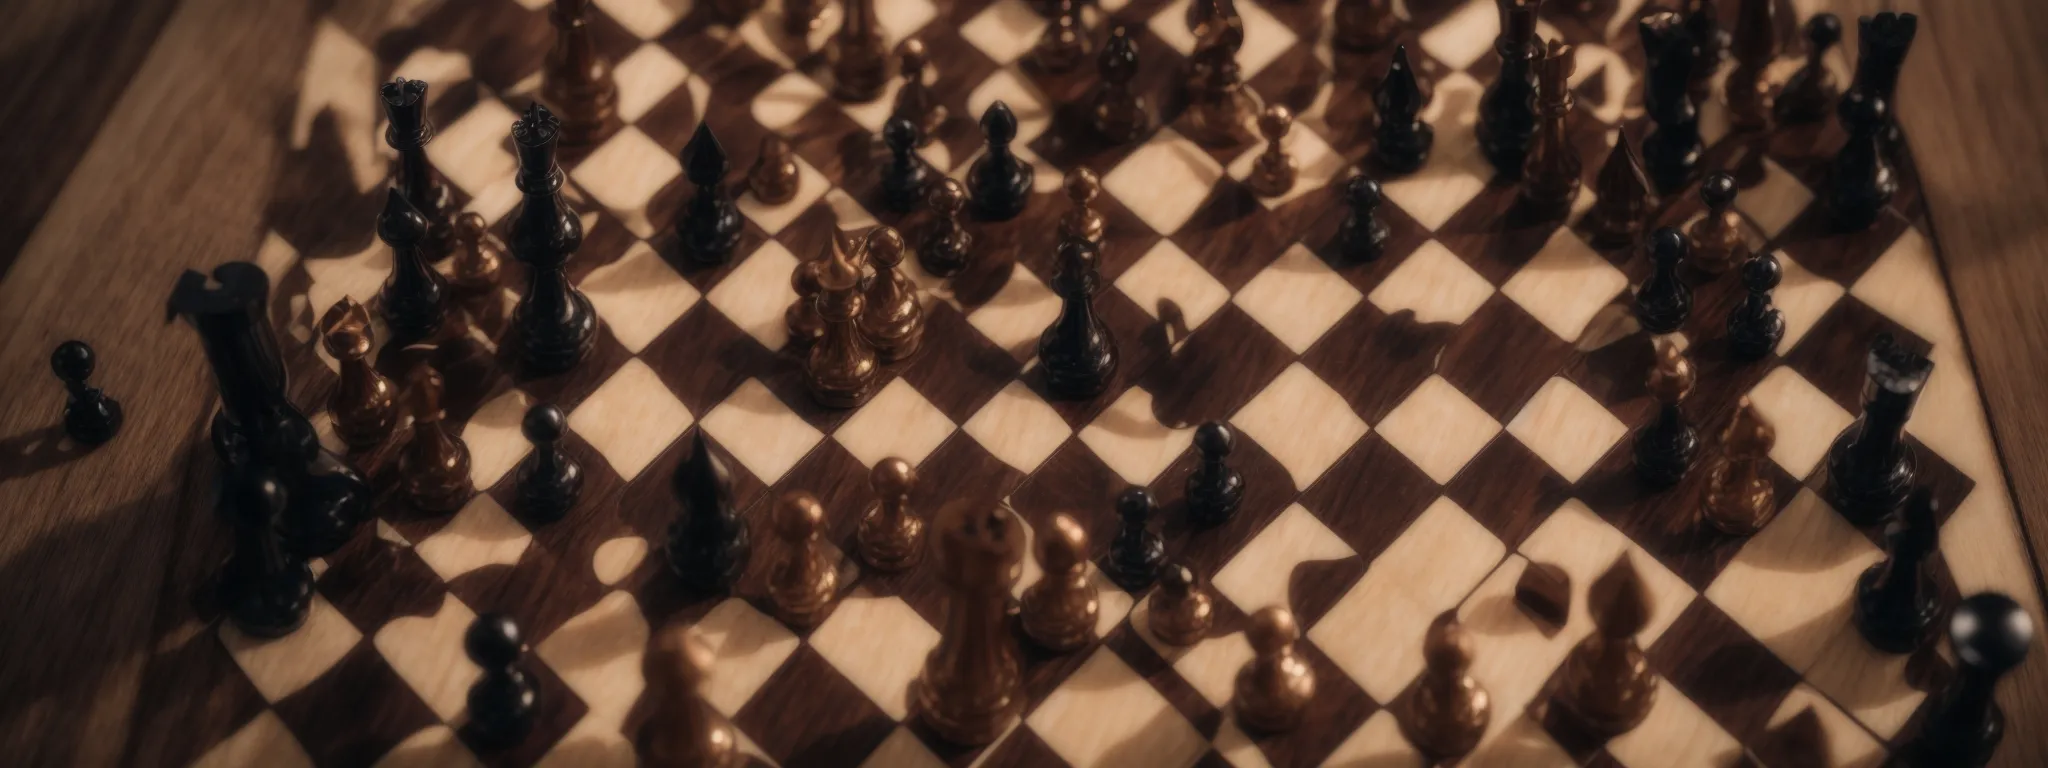 a chessboard from above with one player's pieces strategically positioned, signifying dominance and foresight.